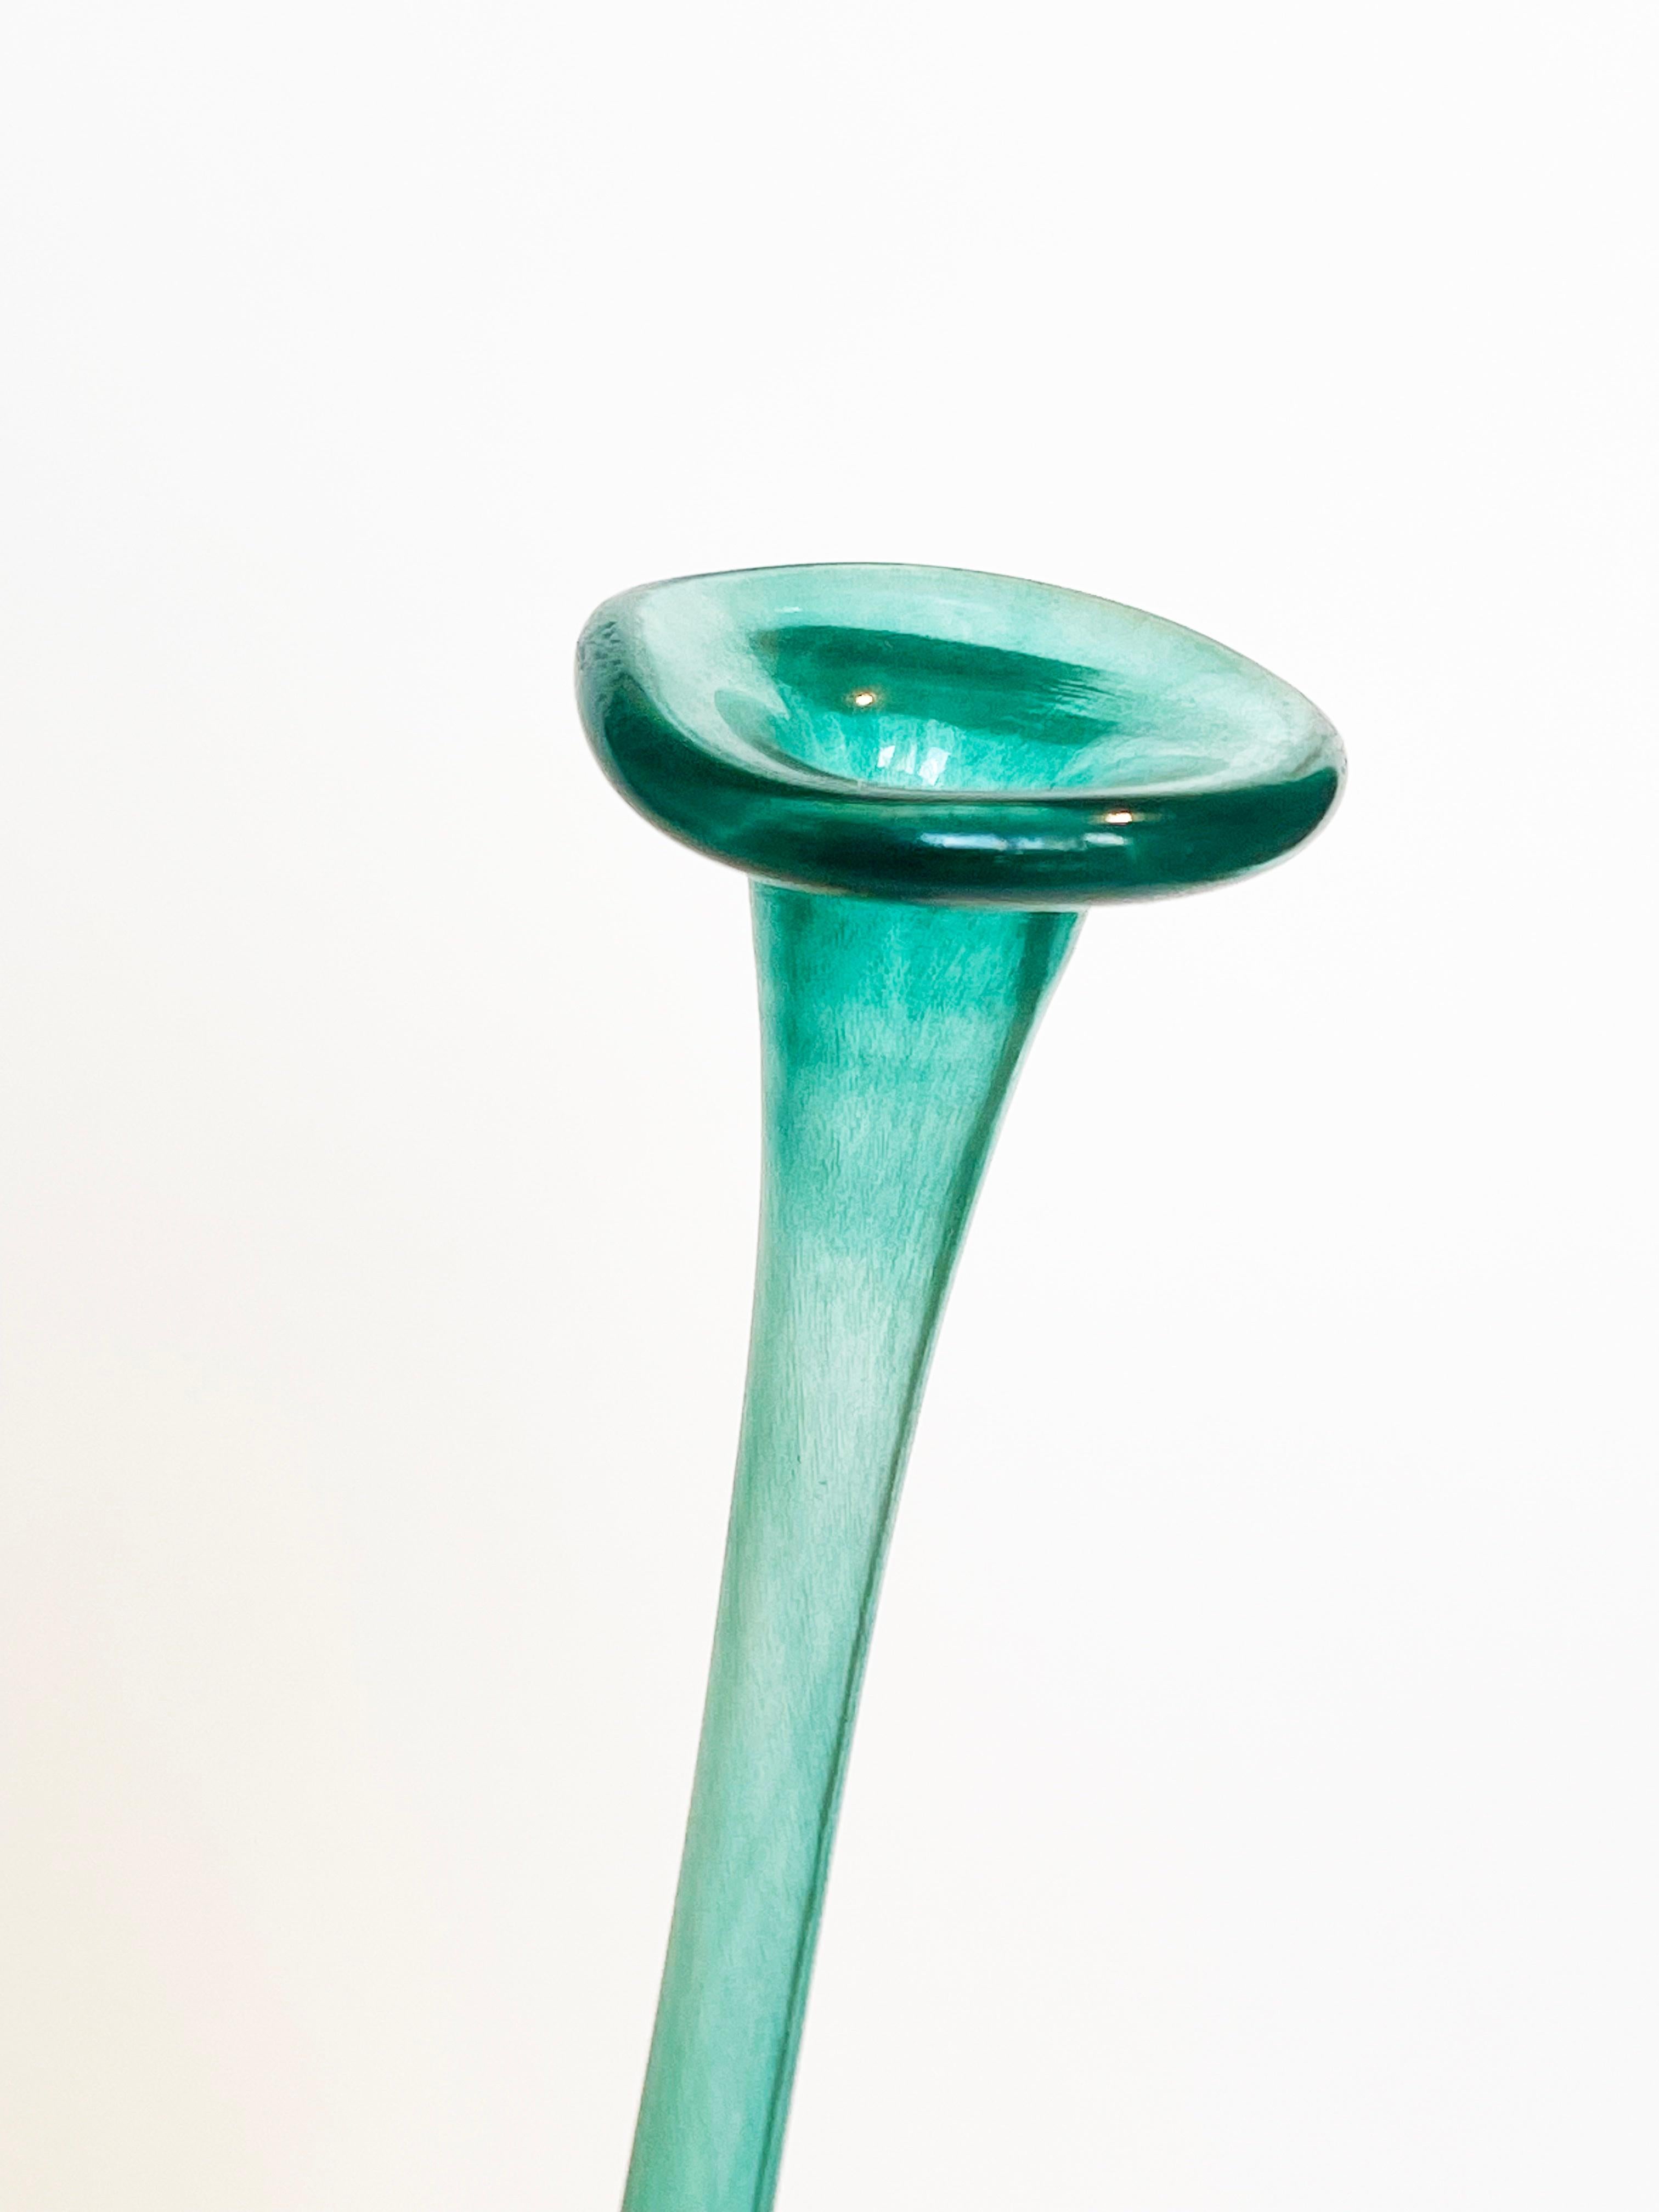 Late 20th Century 1980s Glass Vase Murano Vibe Turquoise Orange by or after Bertil Vallien, Sweden For Sale